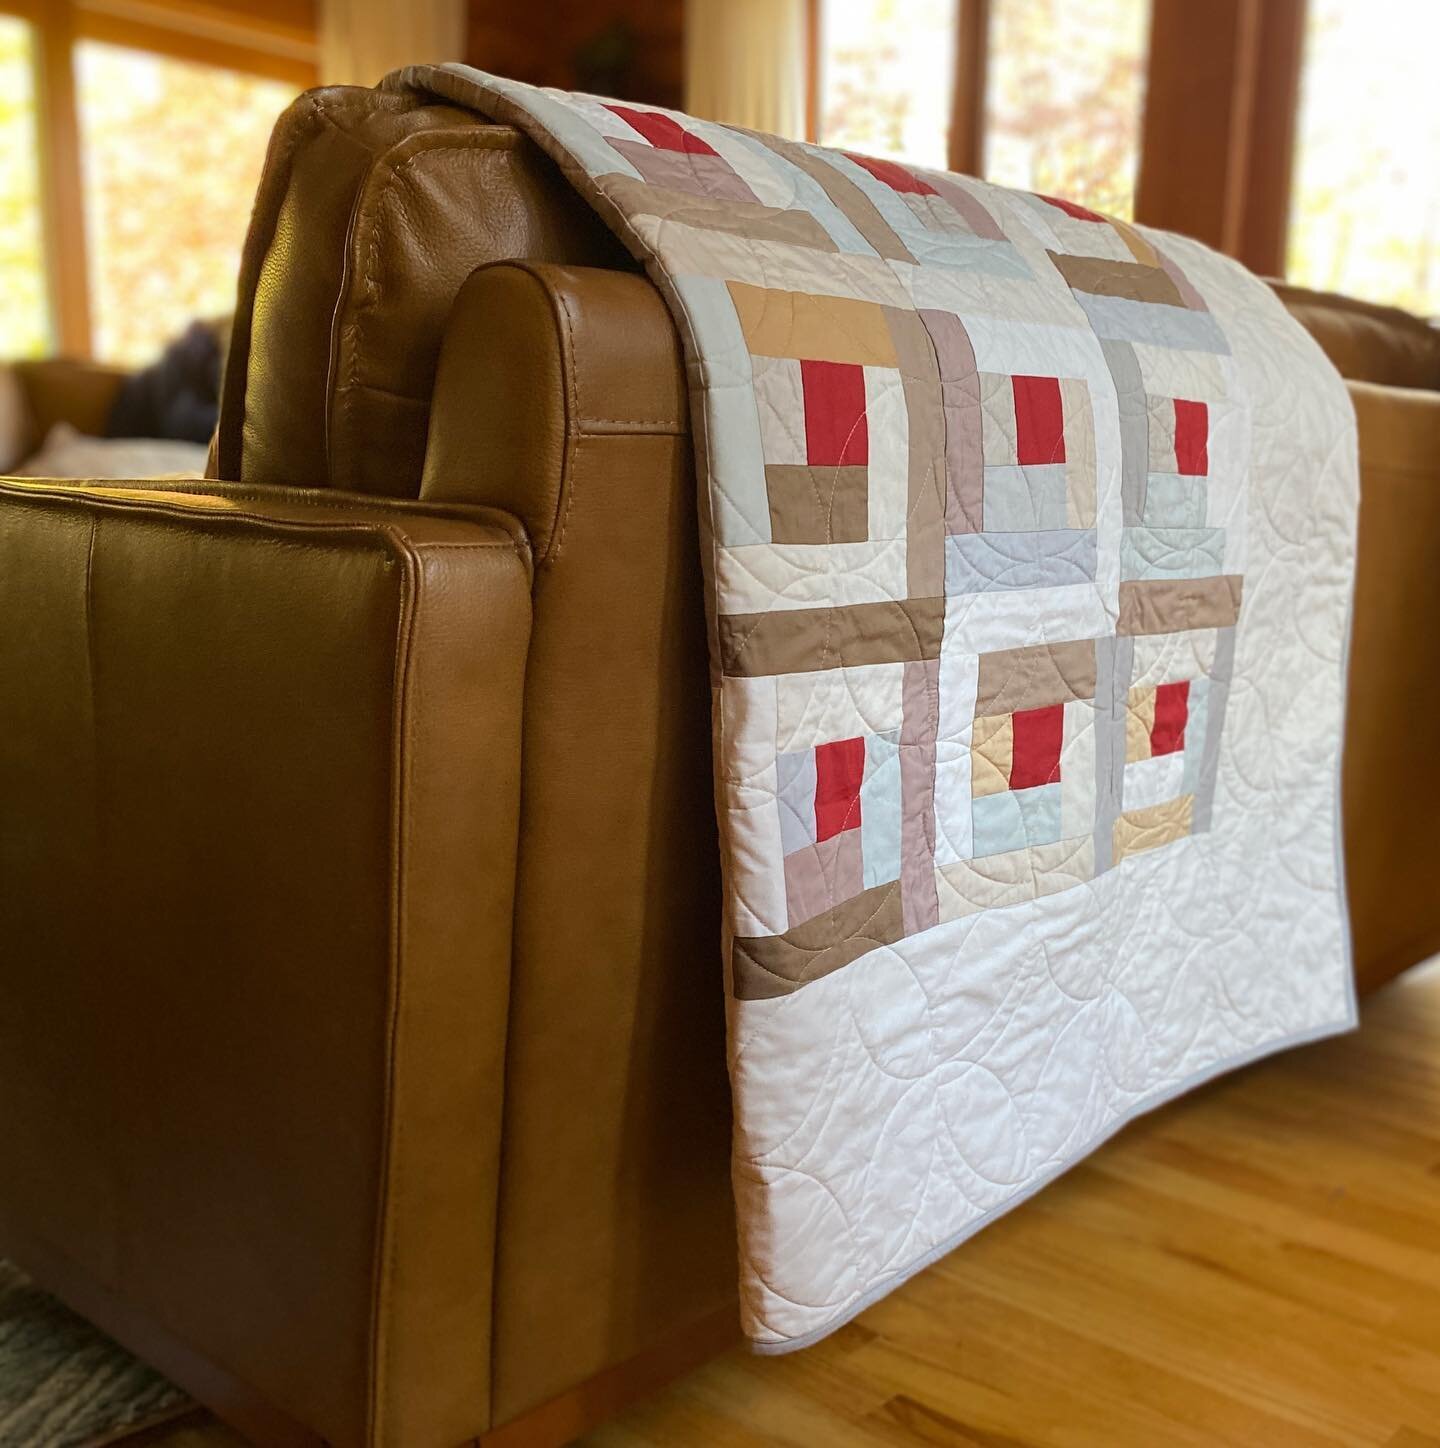 I will never get sick of log cabin quilts. 
.
.
.
.
.
#goodquilt #logcabin #logcabinquilt #modernlogcabinquilt #modernlogcabin #customquilt